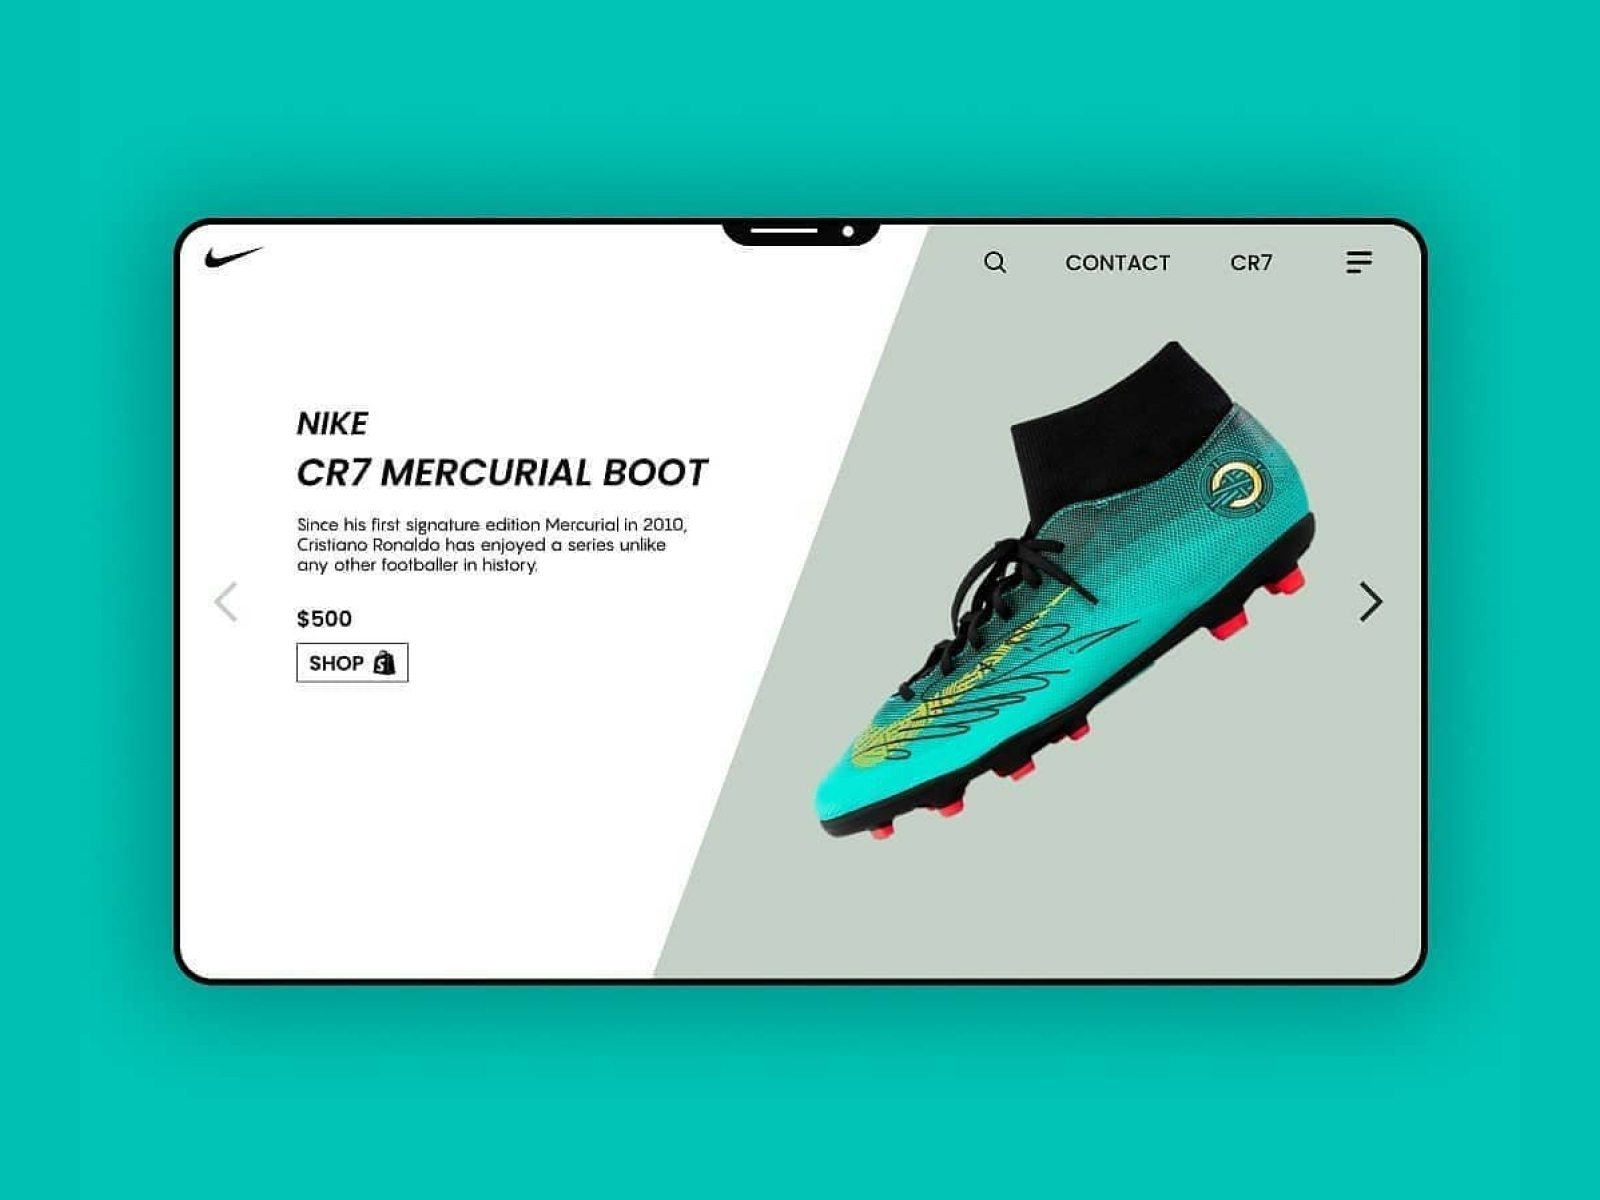 Nike Website Redesign Front Page by SAHIL ALI SALMANI on Dribbble